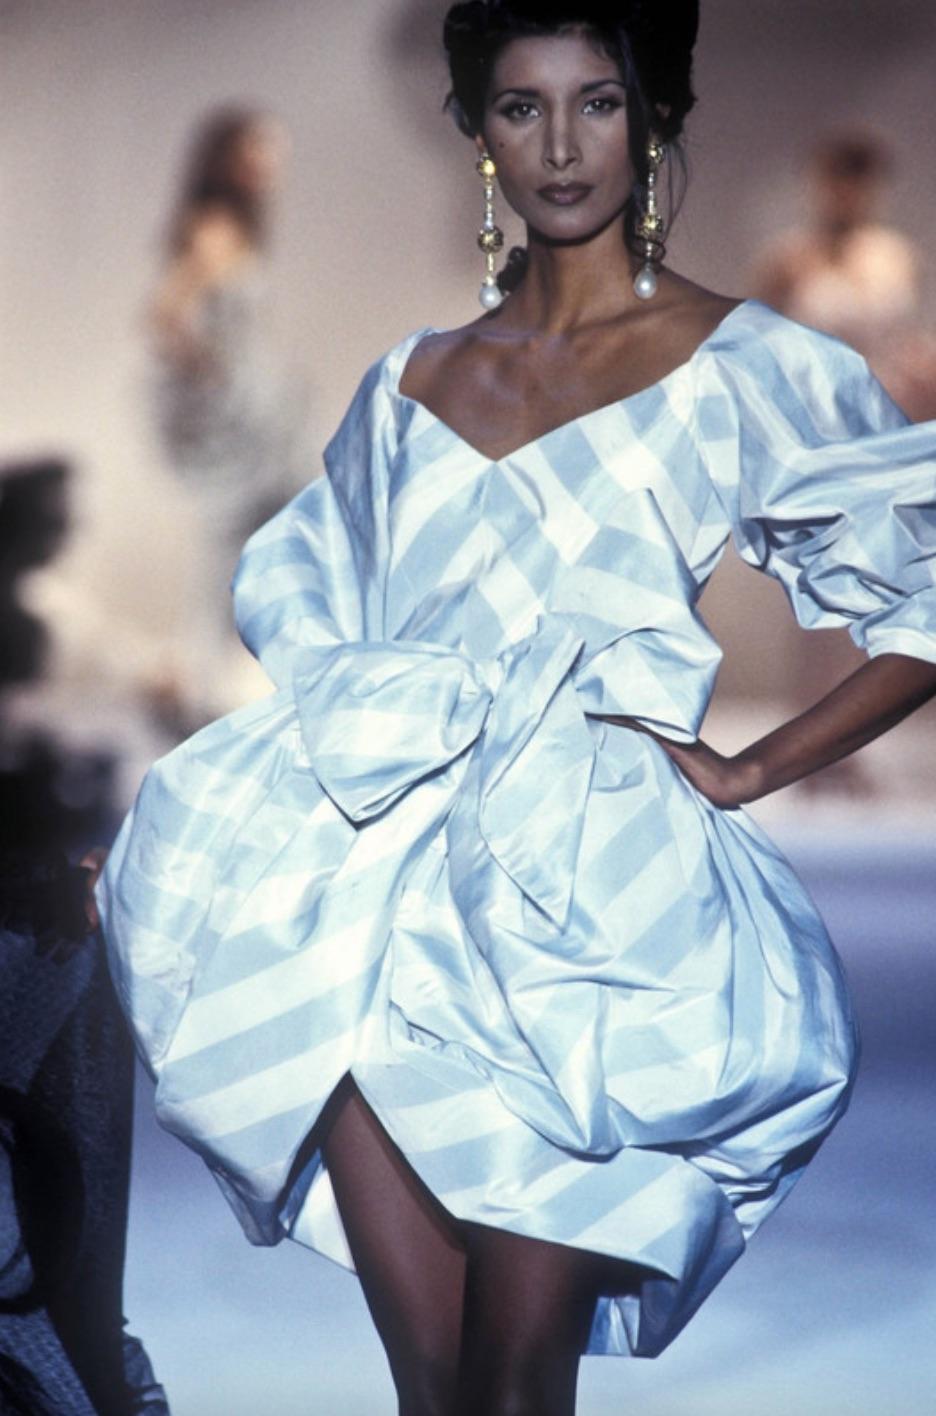 This stunning vintage piece from Spring Summer 1993 by Gianfranco Ferre for Christian Dior is a sight to behold - made of luxurious sky blue and white striped silk taffeta, this dress brings a regal edge. The gorgeous off-the-shoulder style with